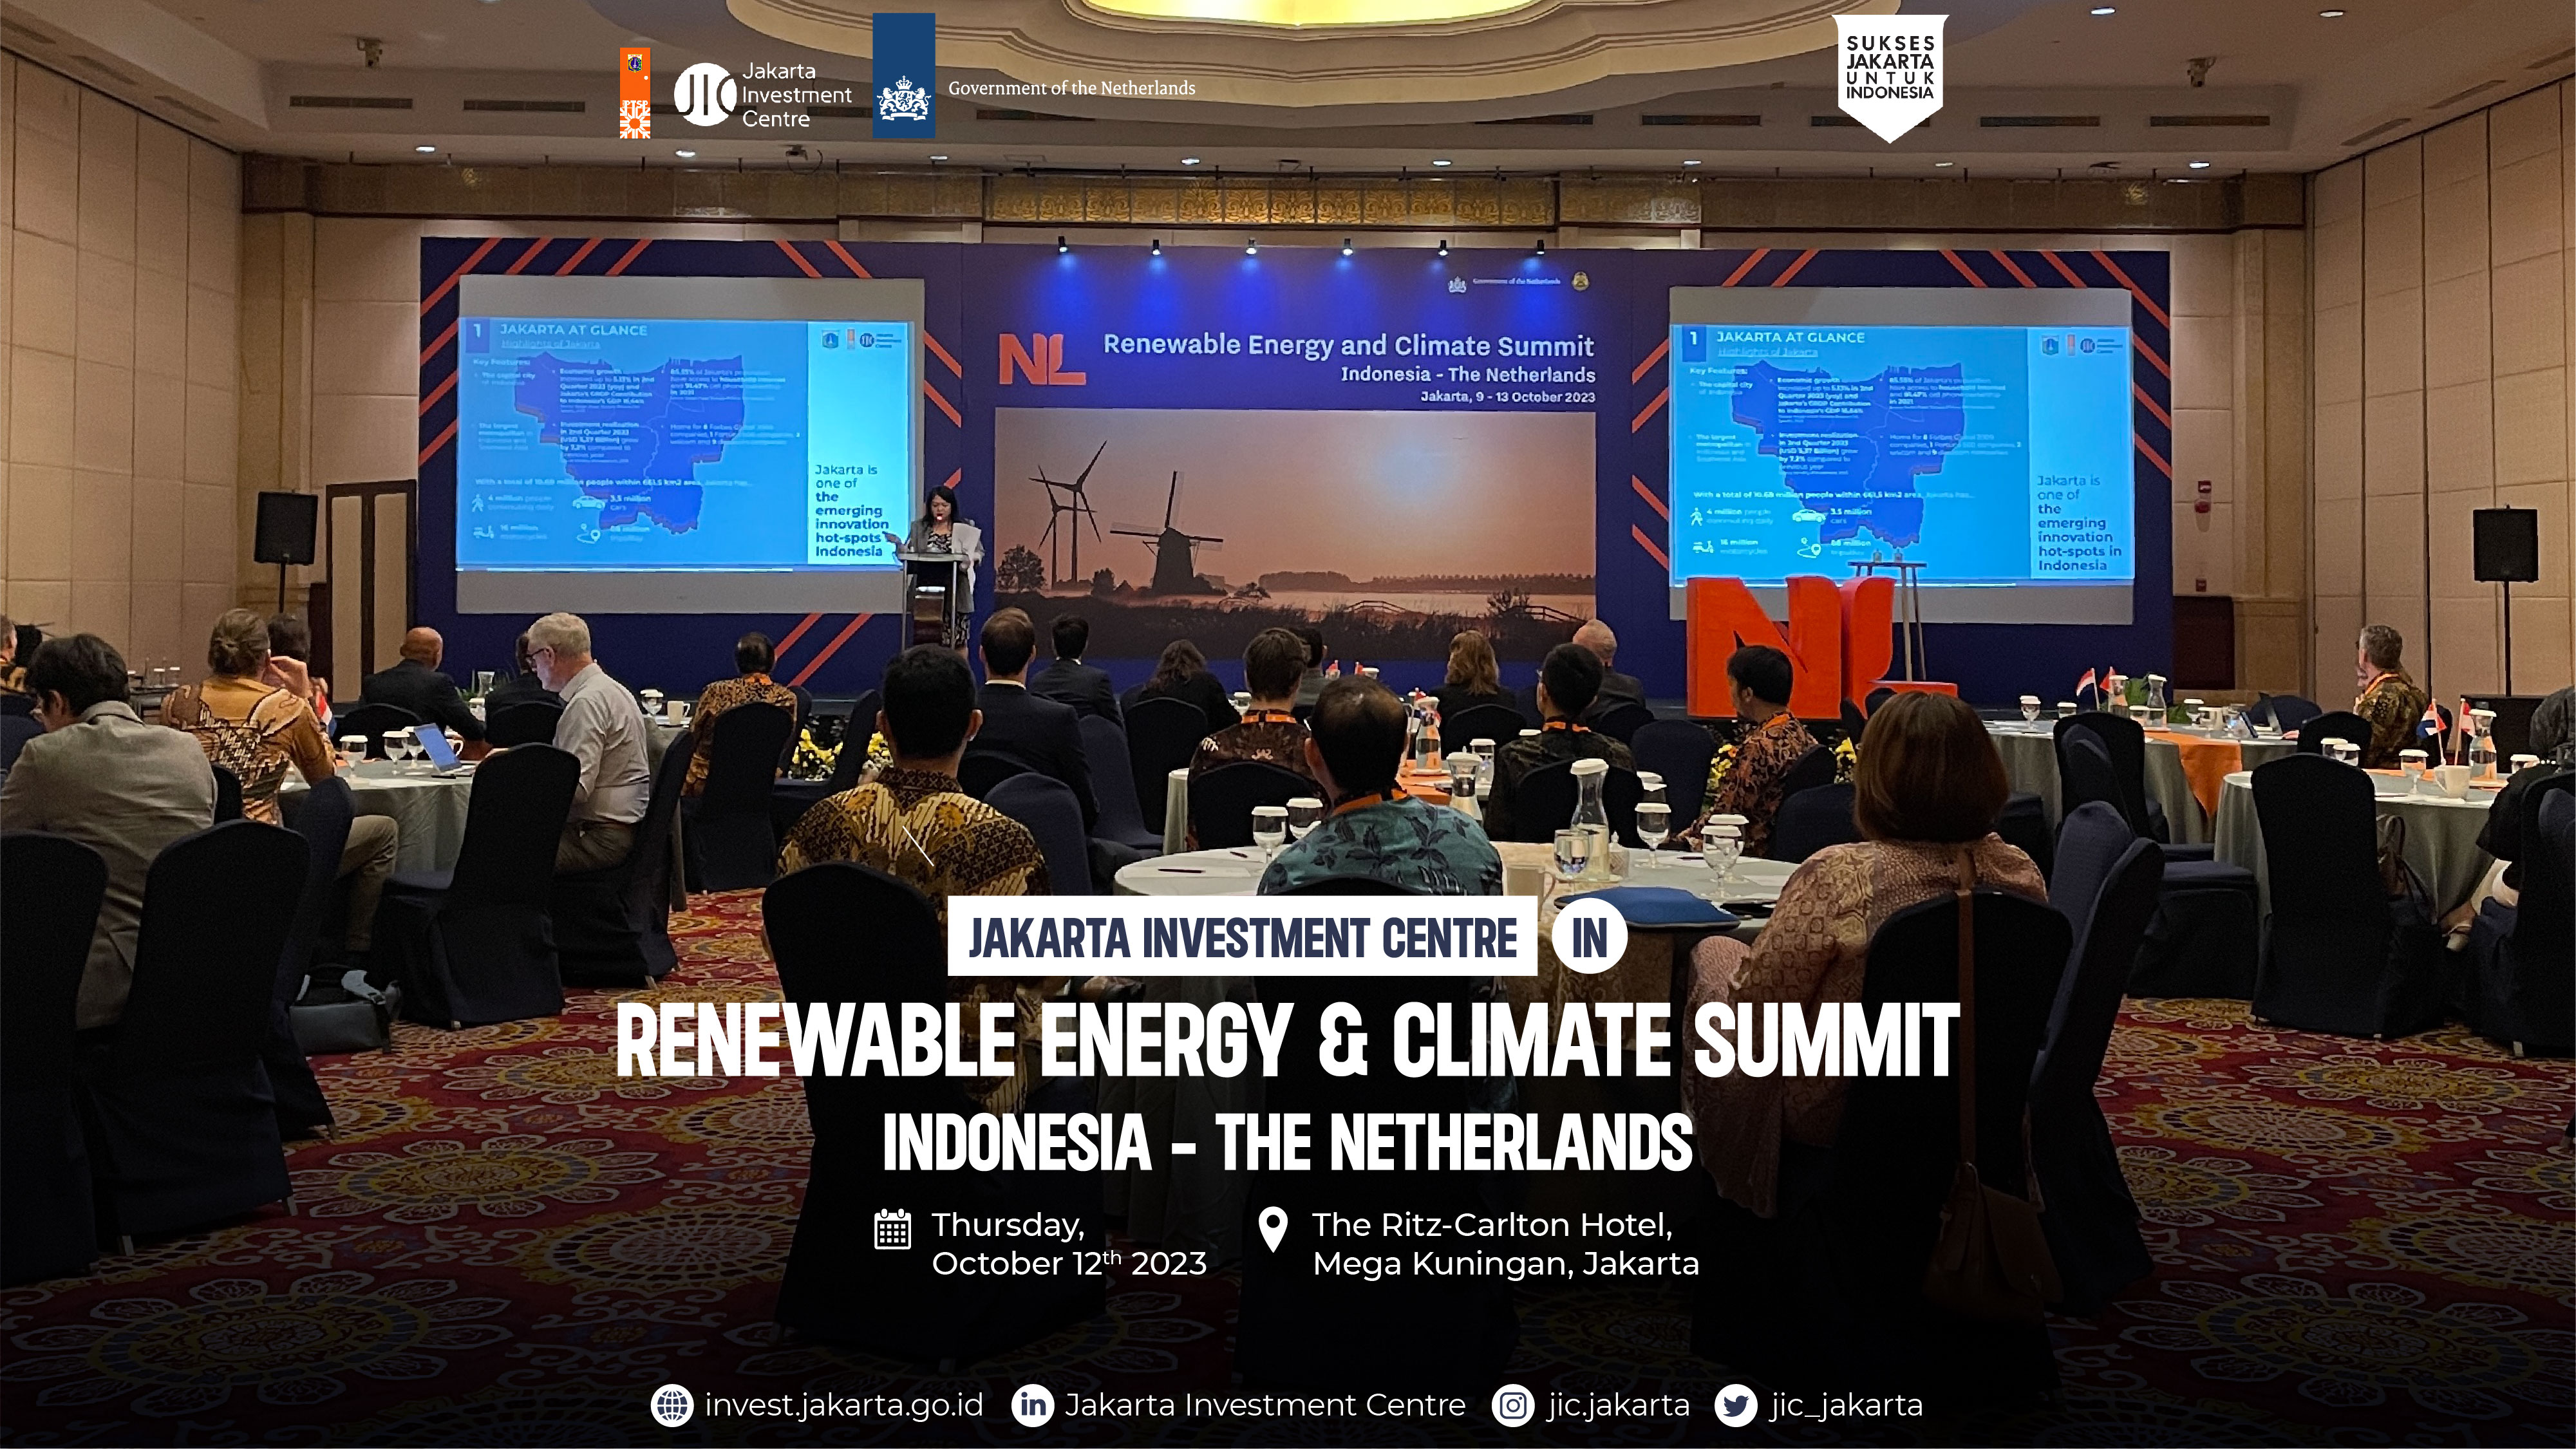 Jakarta Investment Centre (JIC) in Renewable Energy and Climate Summit Indonesia - The Netherlands